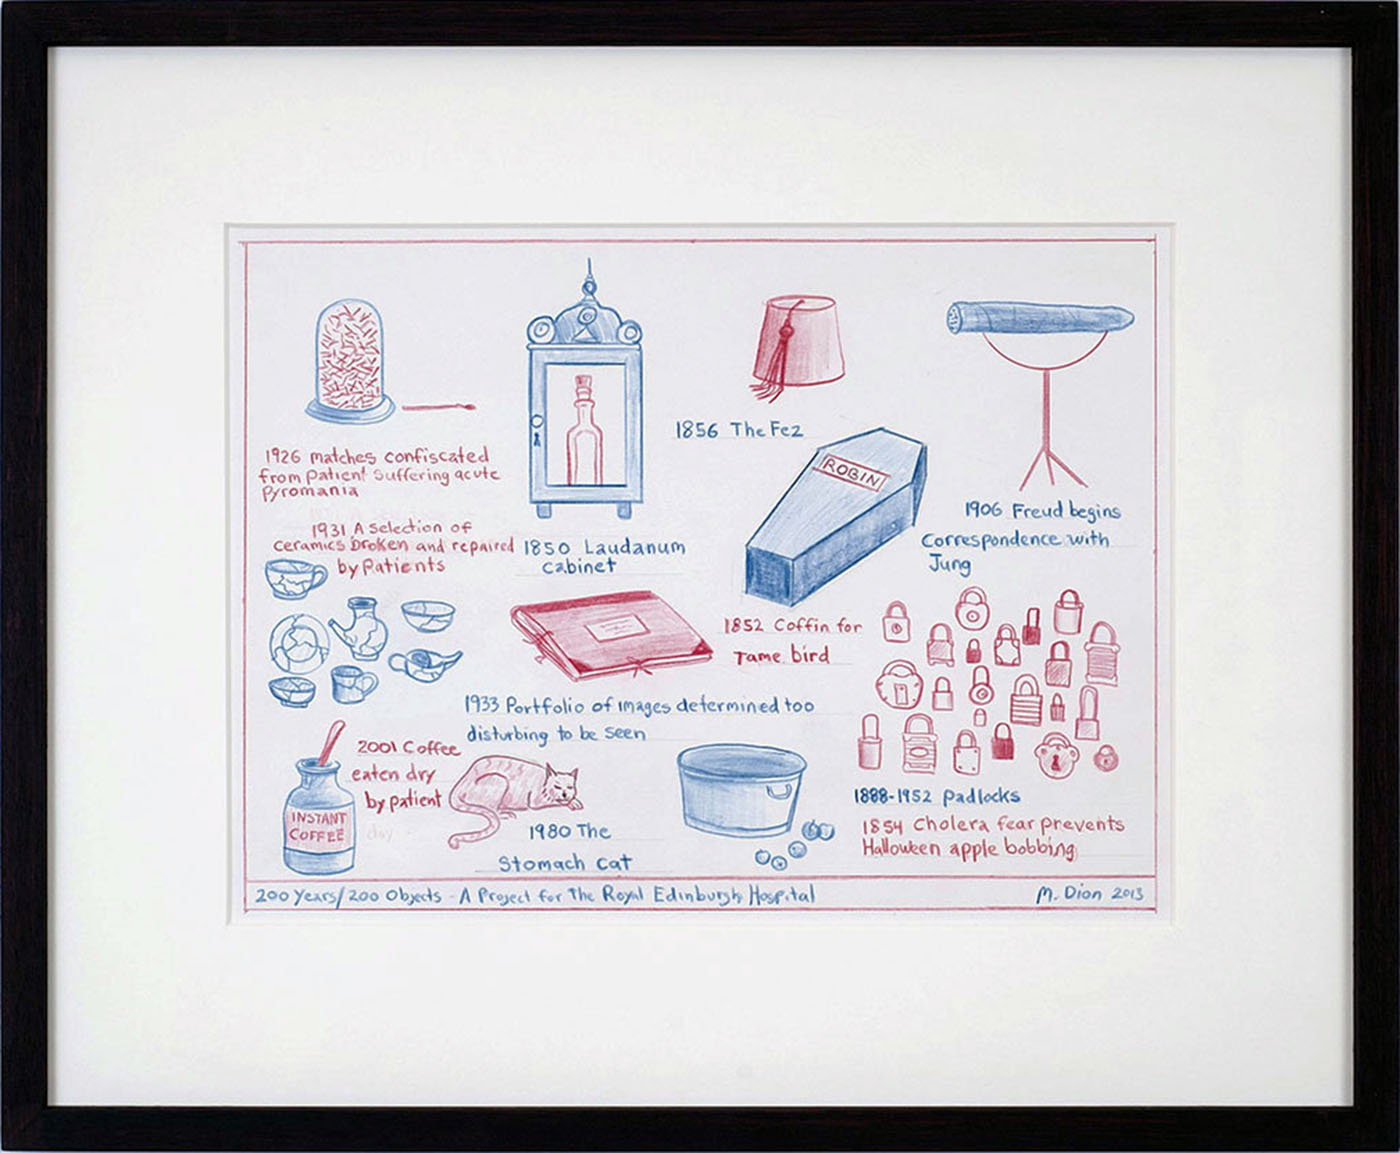 Mark Dion - 200 Years / 200 Objects : A project for the Royal Edinburgh Hospital, 2013